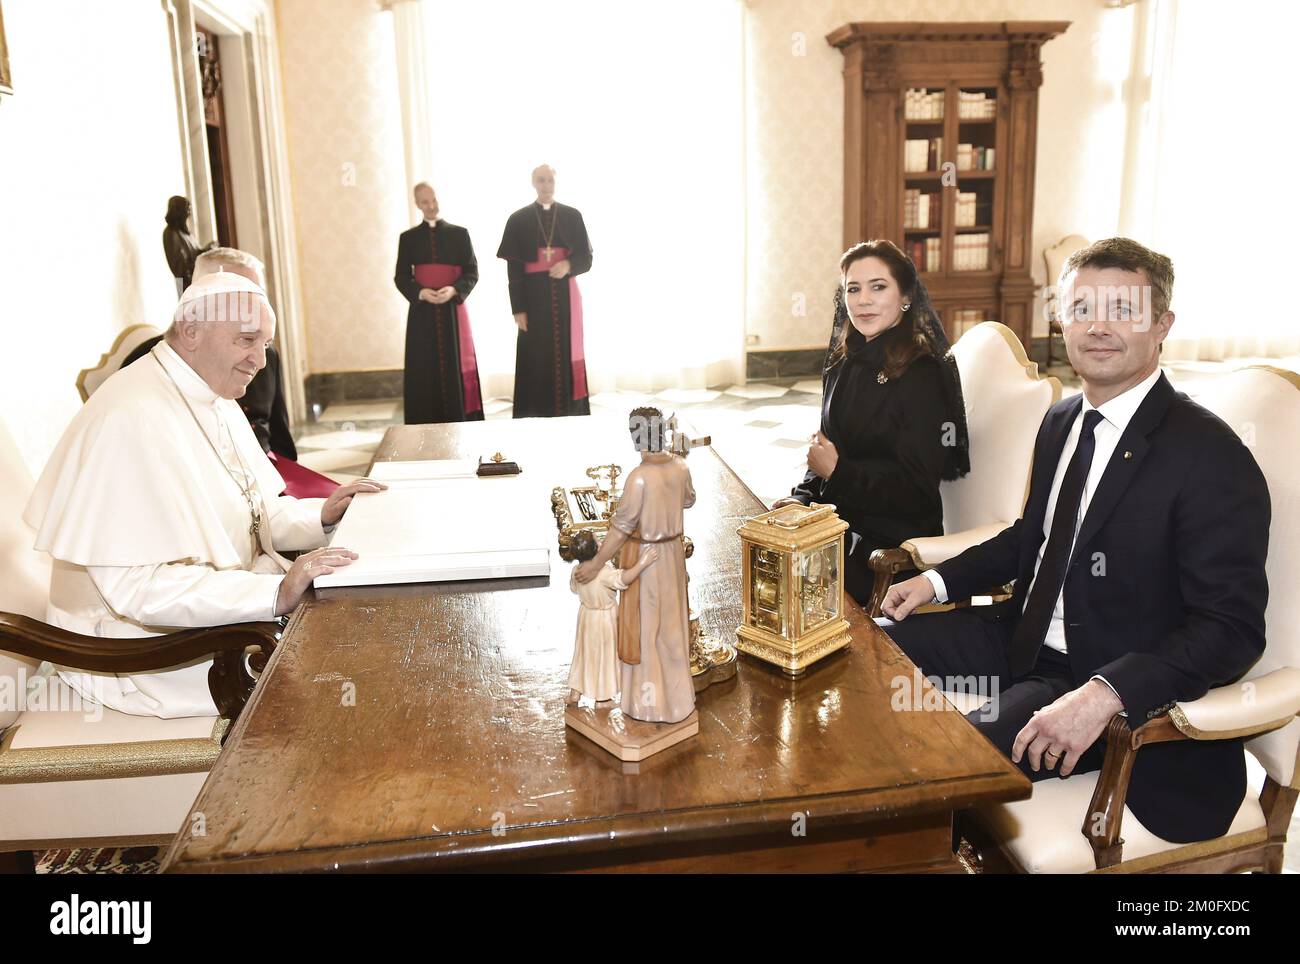 On November 8th 2018 TRH Crown Prince Frederik and Crown Princess Mary had an audience with Pope Francis at the Vatican in Rome. The Crown Prince Couple is part of a business delegation promoting Danish/Italian business alliances and the visit lasts from November 6th to 8th. Stock Photo